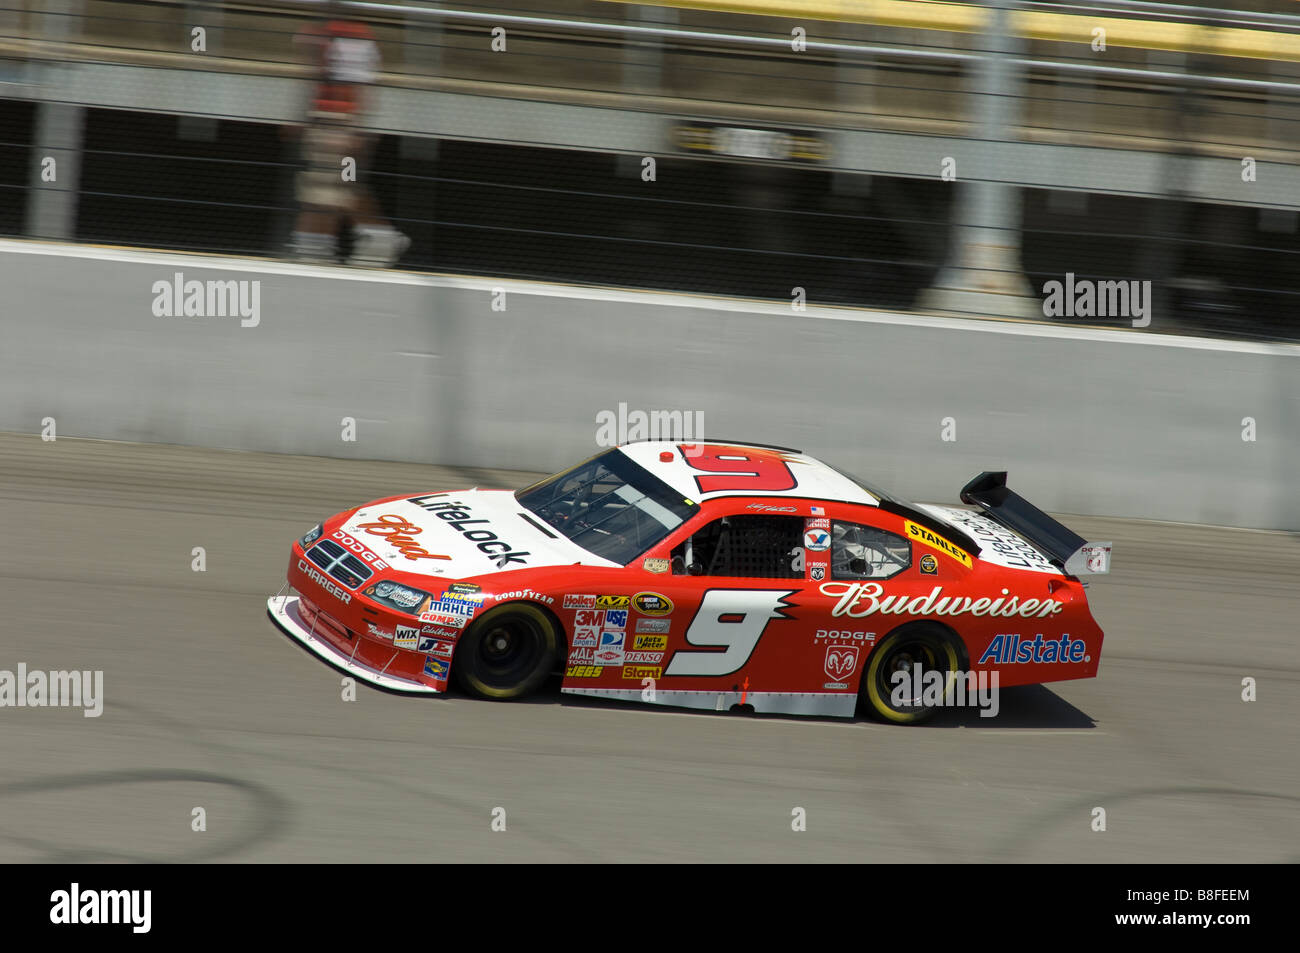 Kasey Kahne races his Dodge Charger at the LifeLock 400 NASCAR race at Michigan International Speedway 2008. Stock Photo